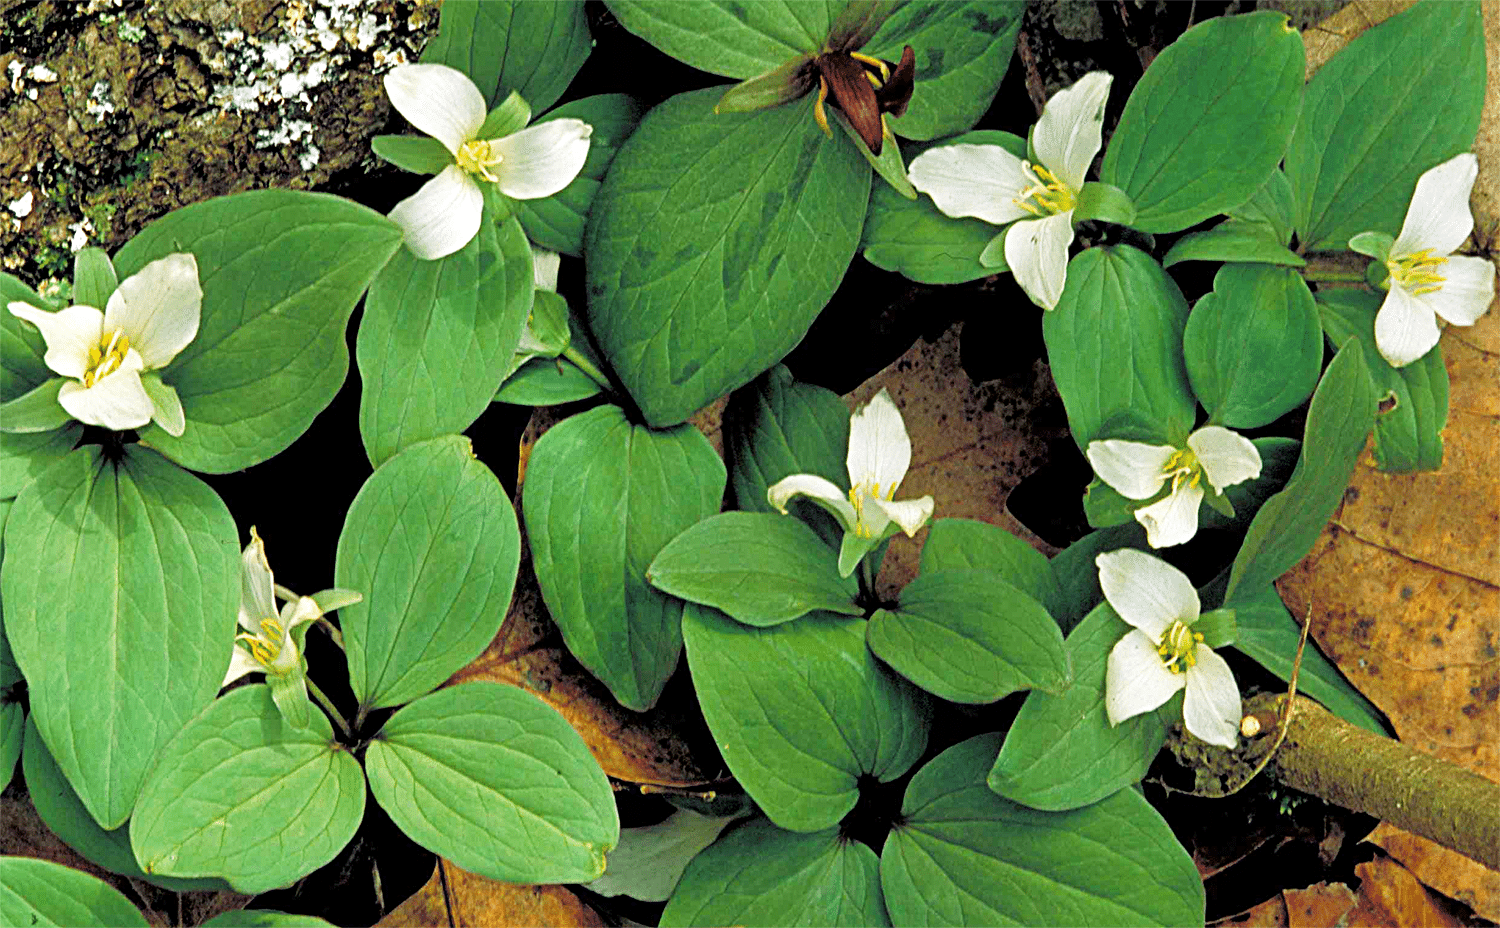 horizontal photo of some white snow trillium wildflowers growing in a bed of dead leaves